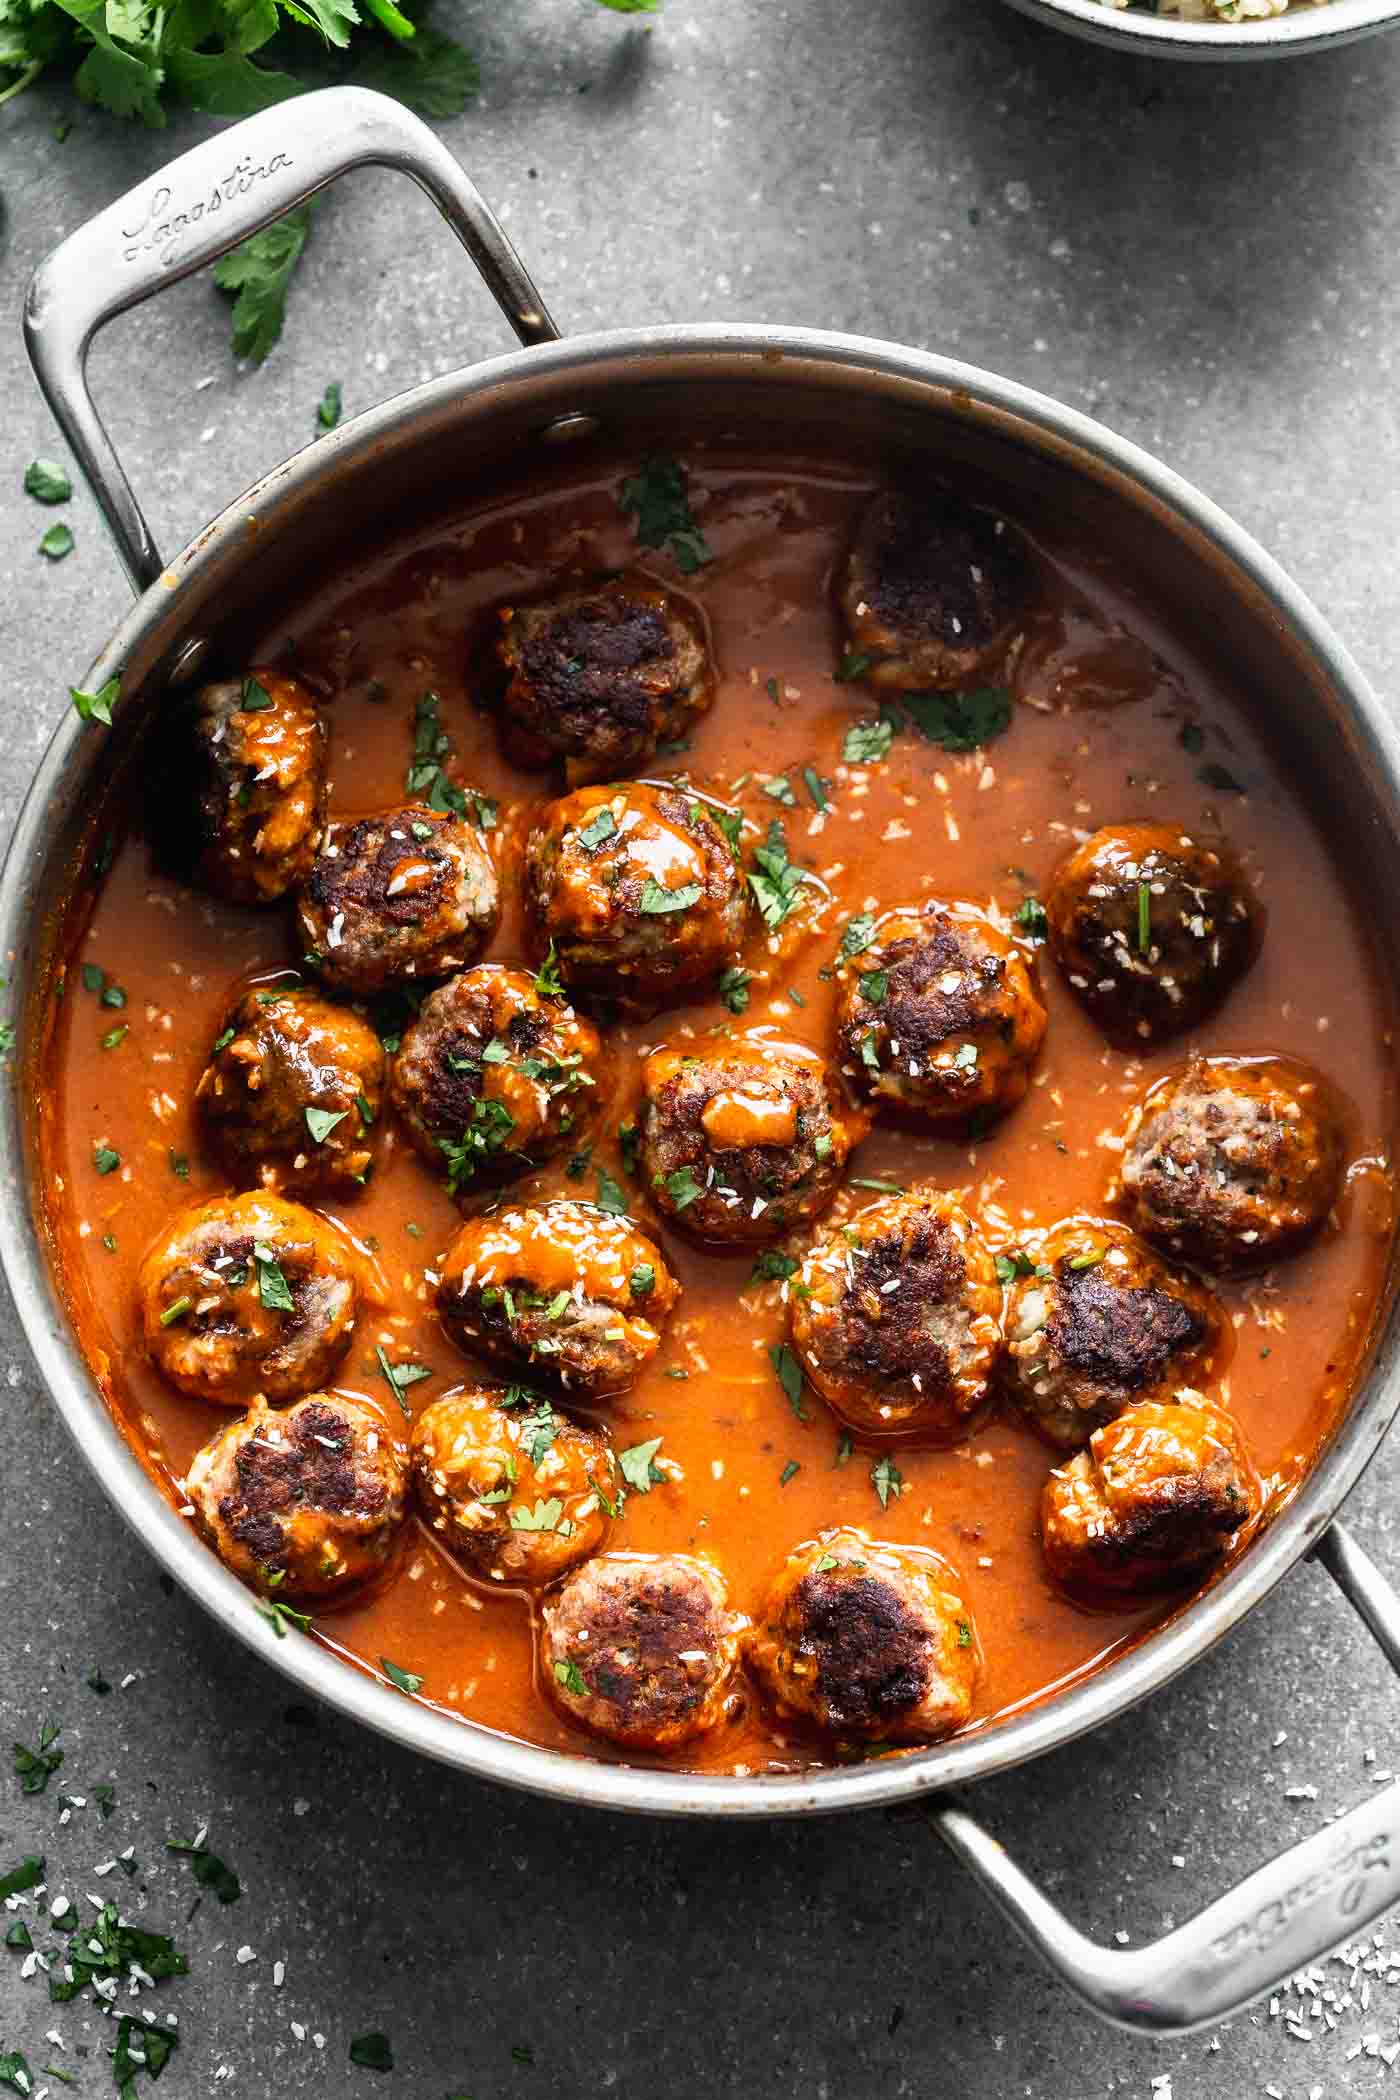 These Coconut Curry Meatballs require minimal ingredients, but have SO much flavor. They're packed with garlic, ginger, onion and cilantro, browned until crisp, and bathed in a luscious coconut curry sauce. Only 30 minutes from start to finish!&nbsp;